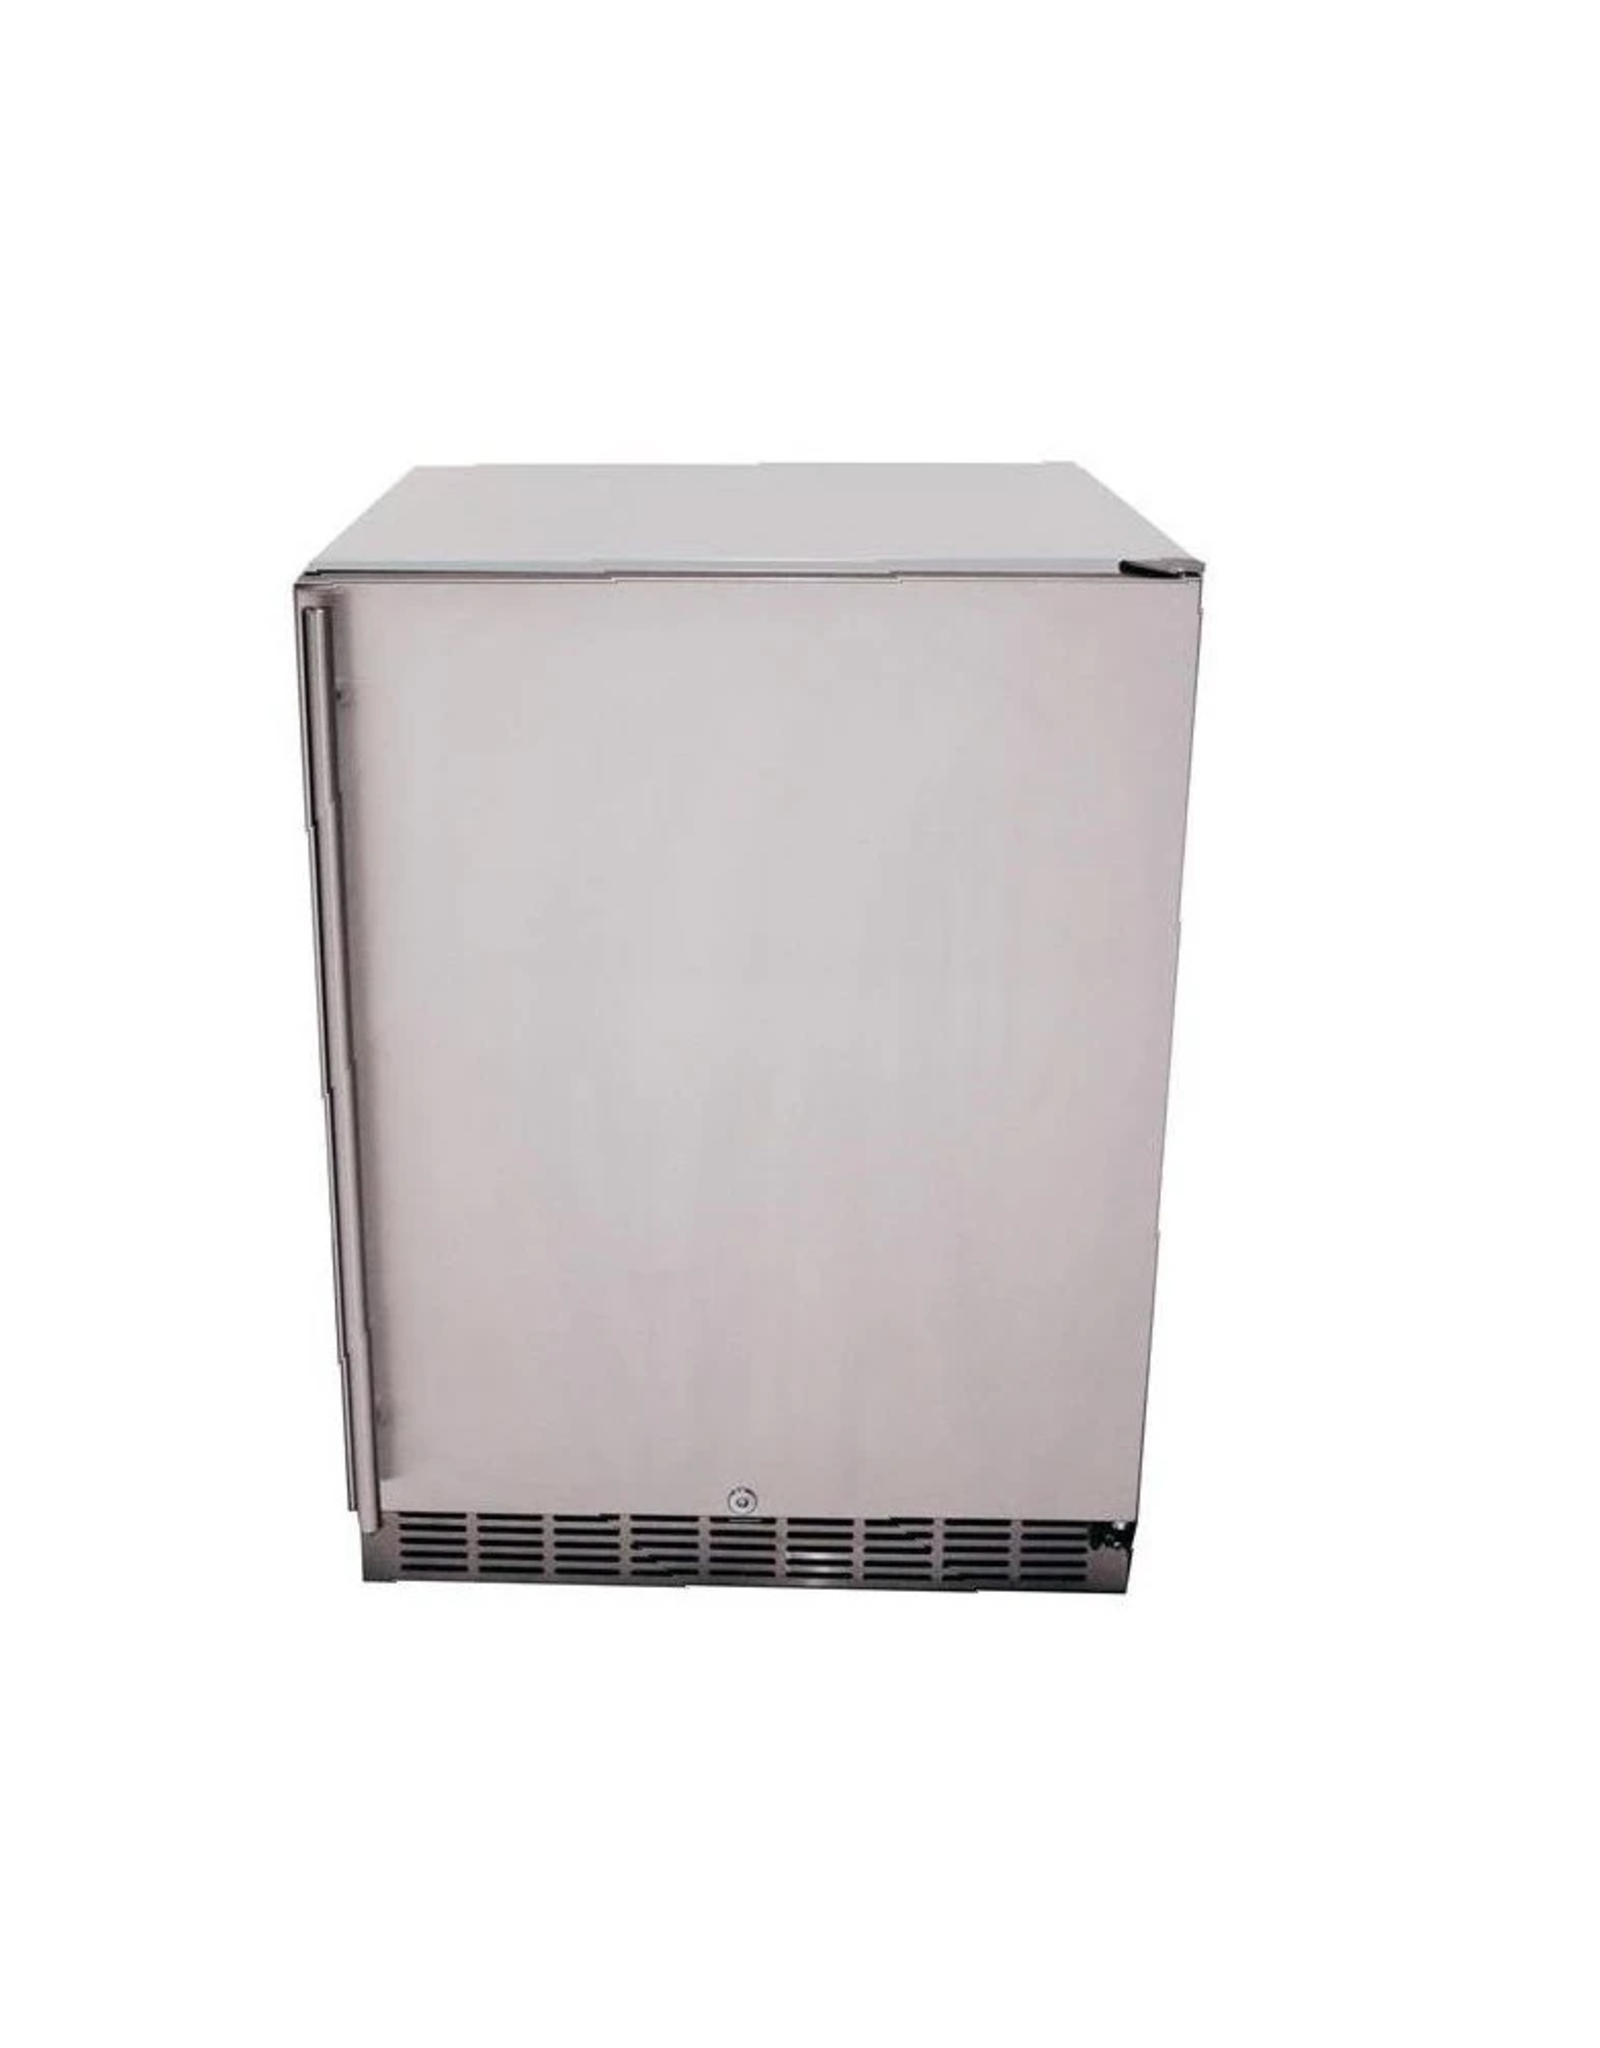 Renaissance Cooking Systems Renaissance Cooking Systems Refrigerator - Stainless Steel - REFR2A